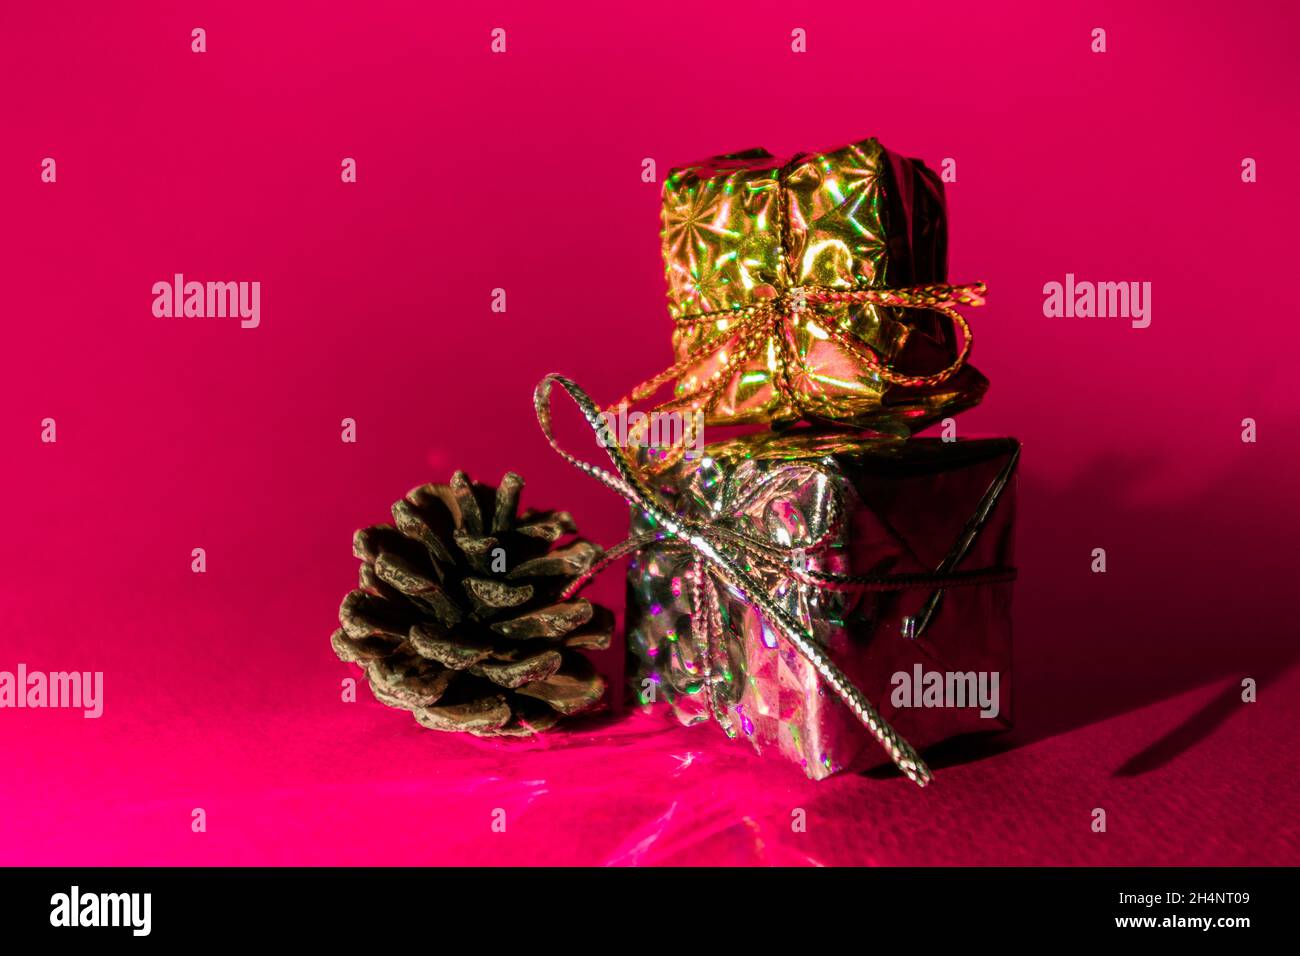 Two New Year's gifts on a pink background. Stock Photo